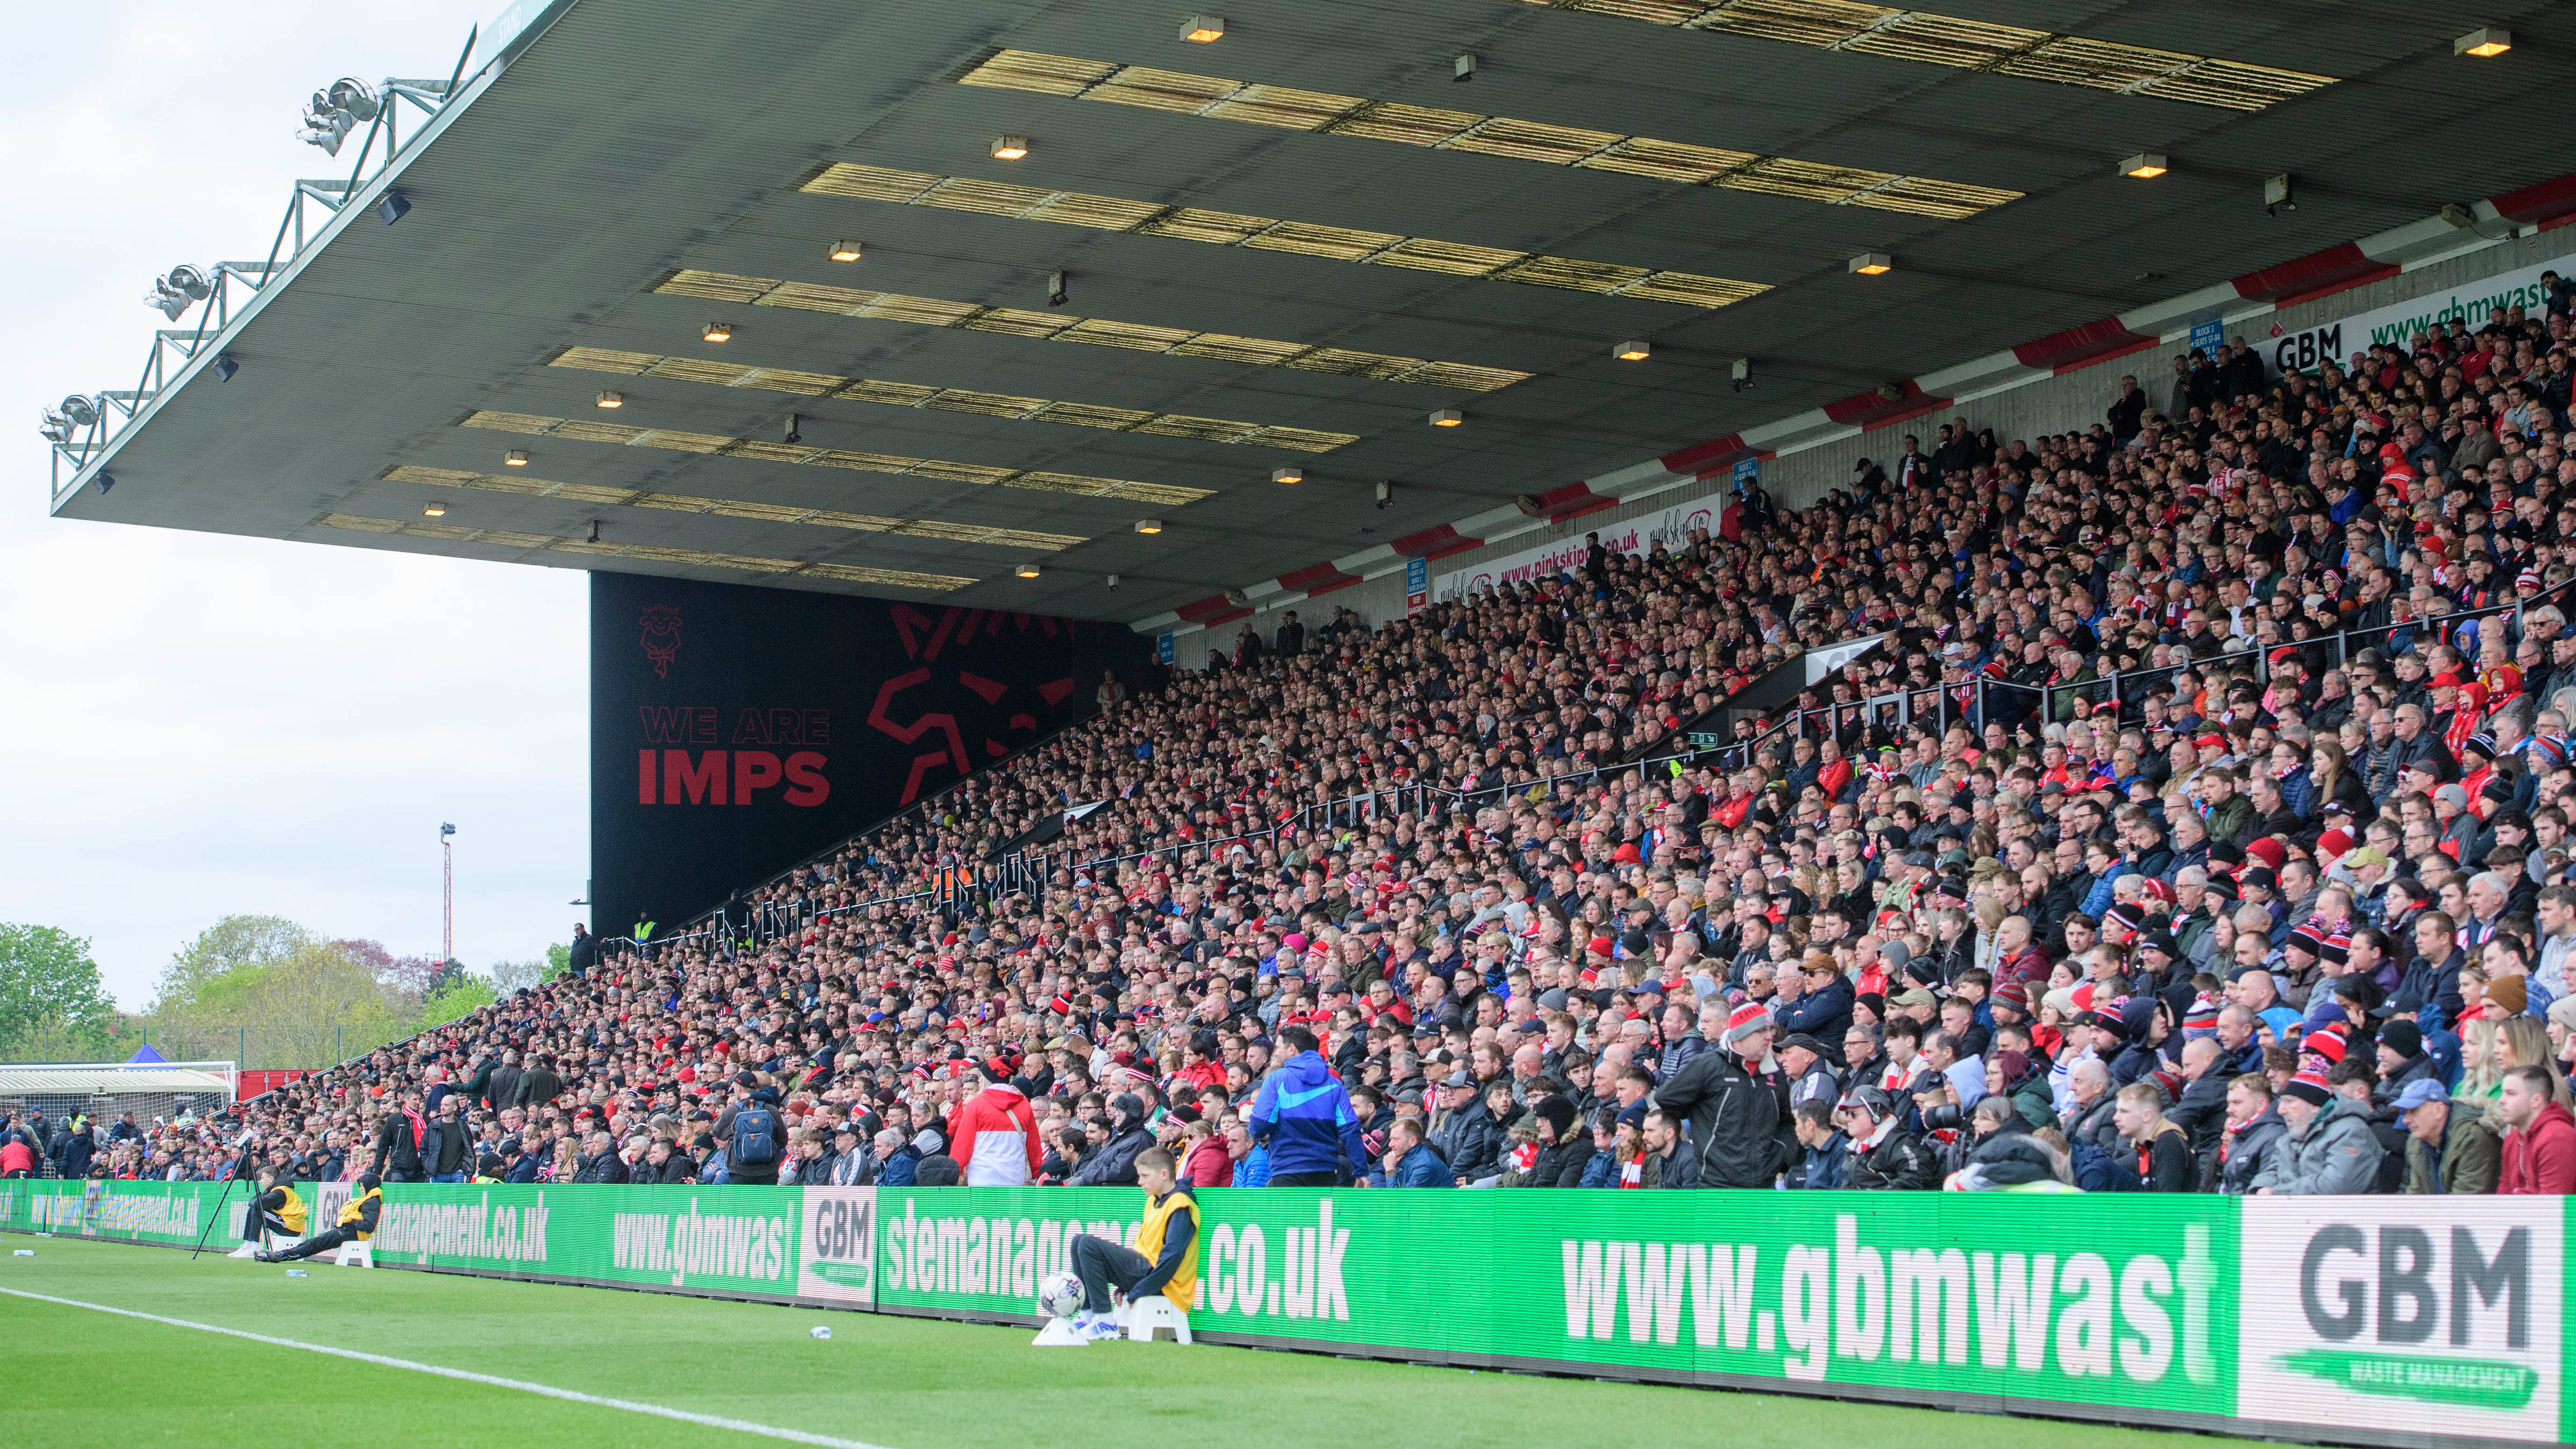 Lincoln City fans pack out the GBM Stand during a game. a Mural at the end of the stand says "We Are Imps"